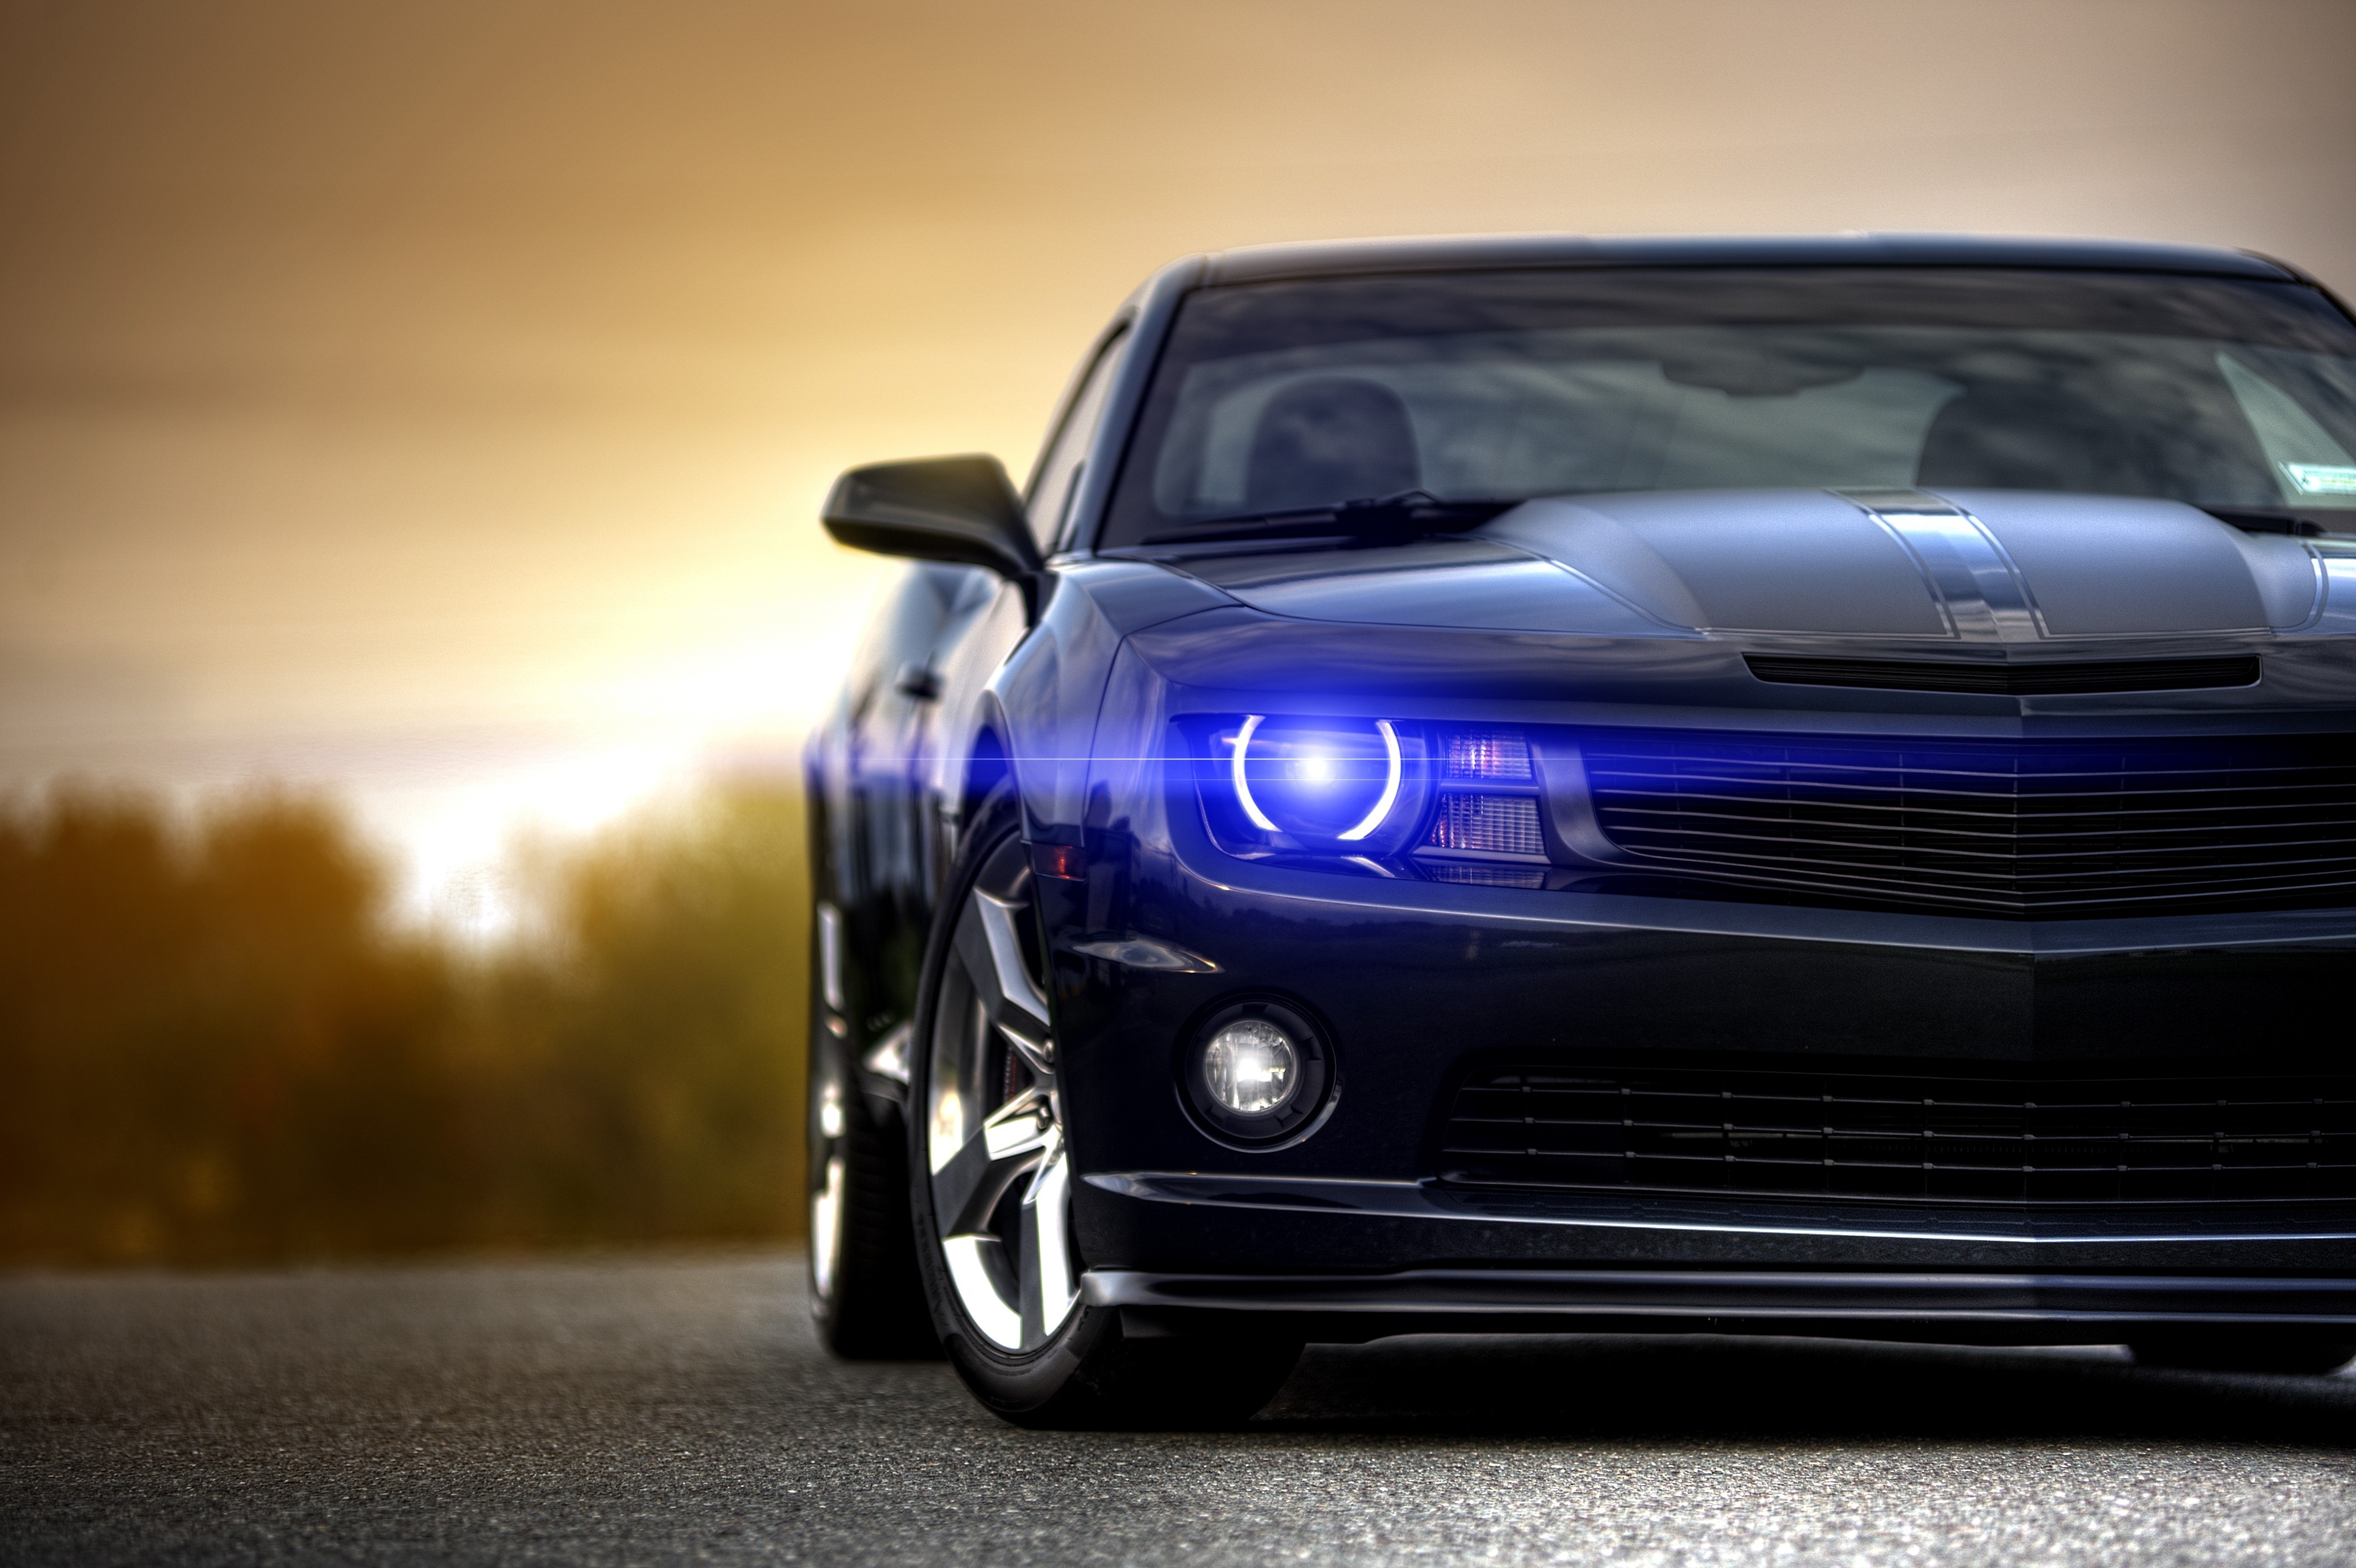 Muscle Car Widescreen image